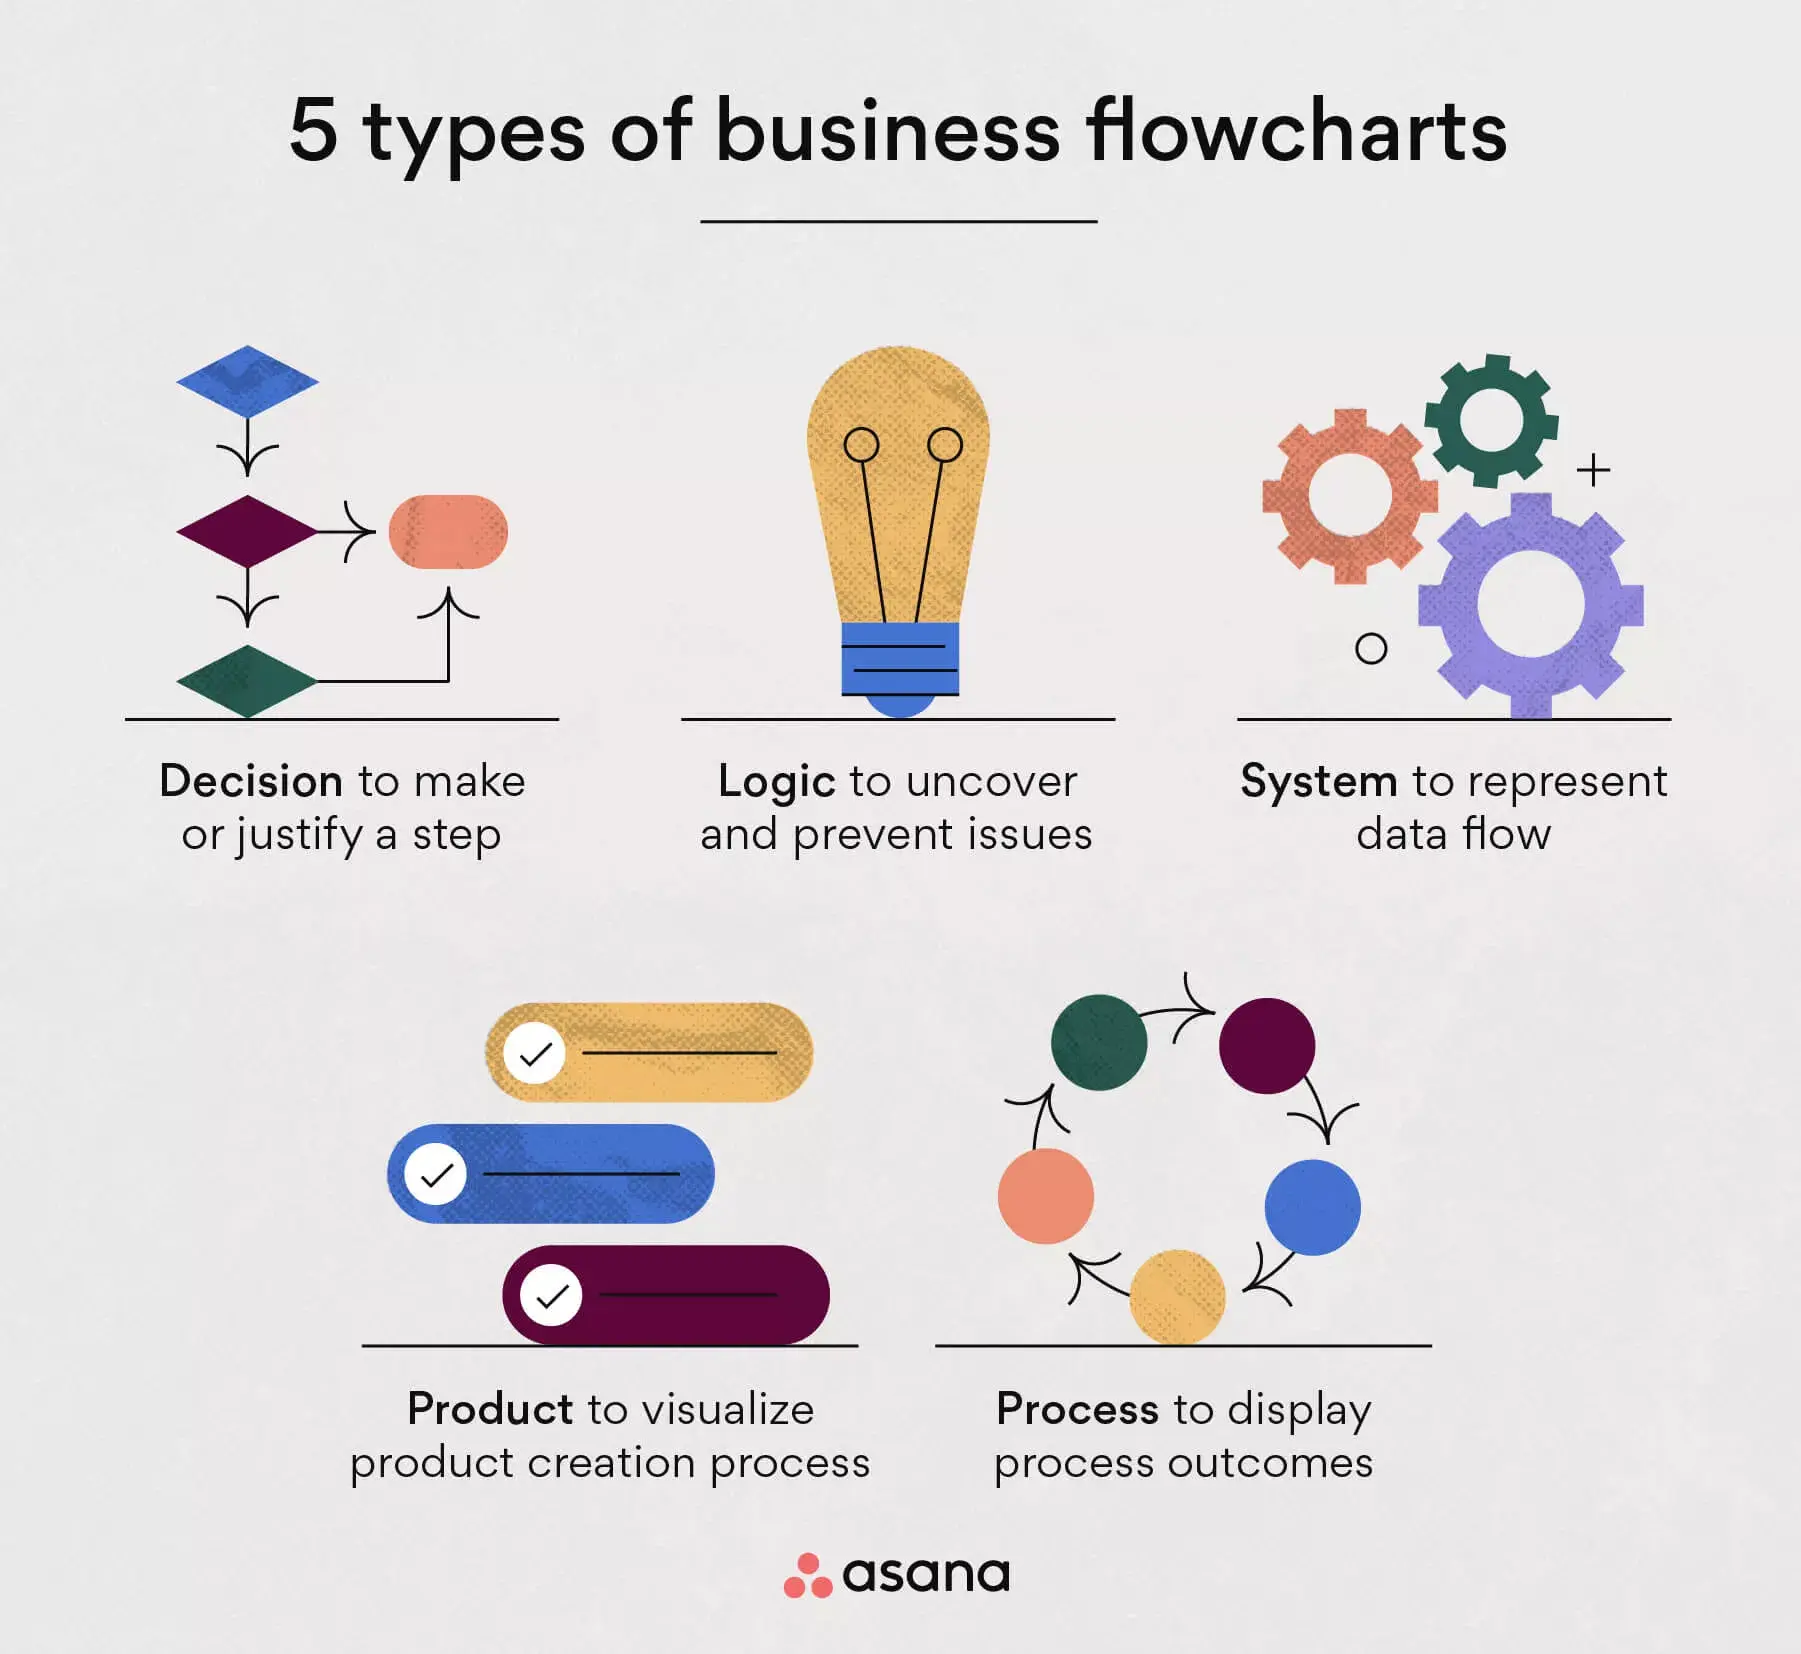 [inline illustration] Types of business flowcharts (infographic)